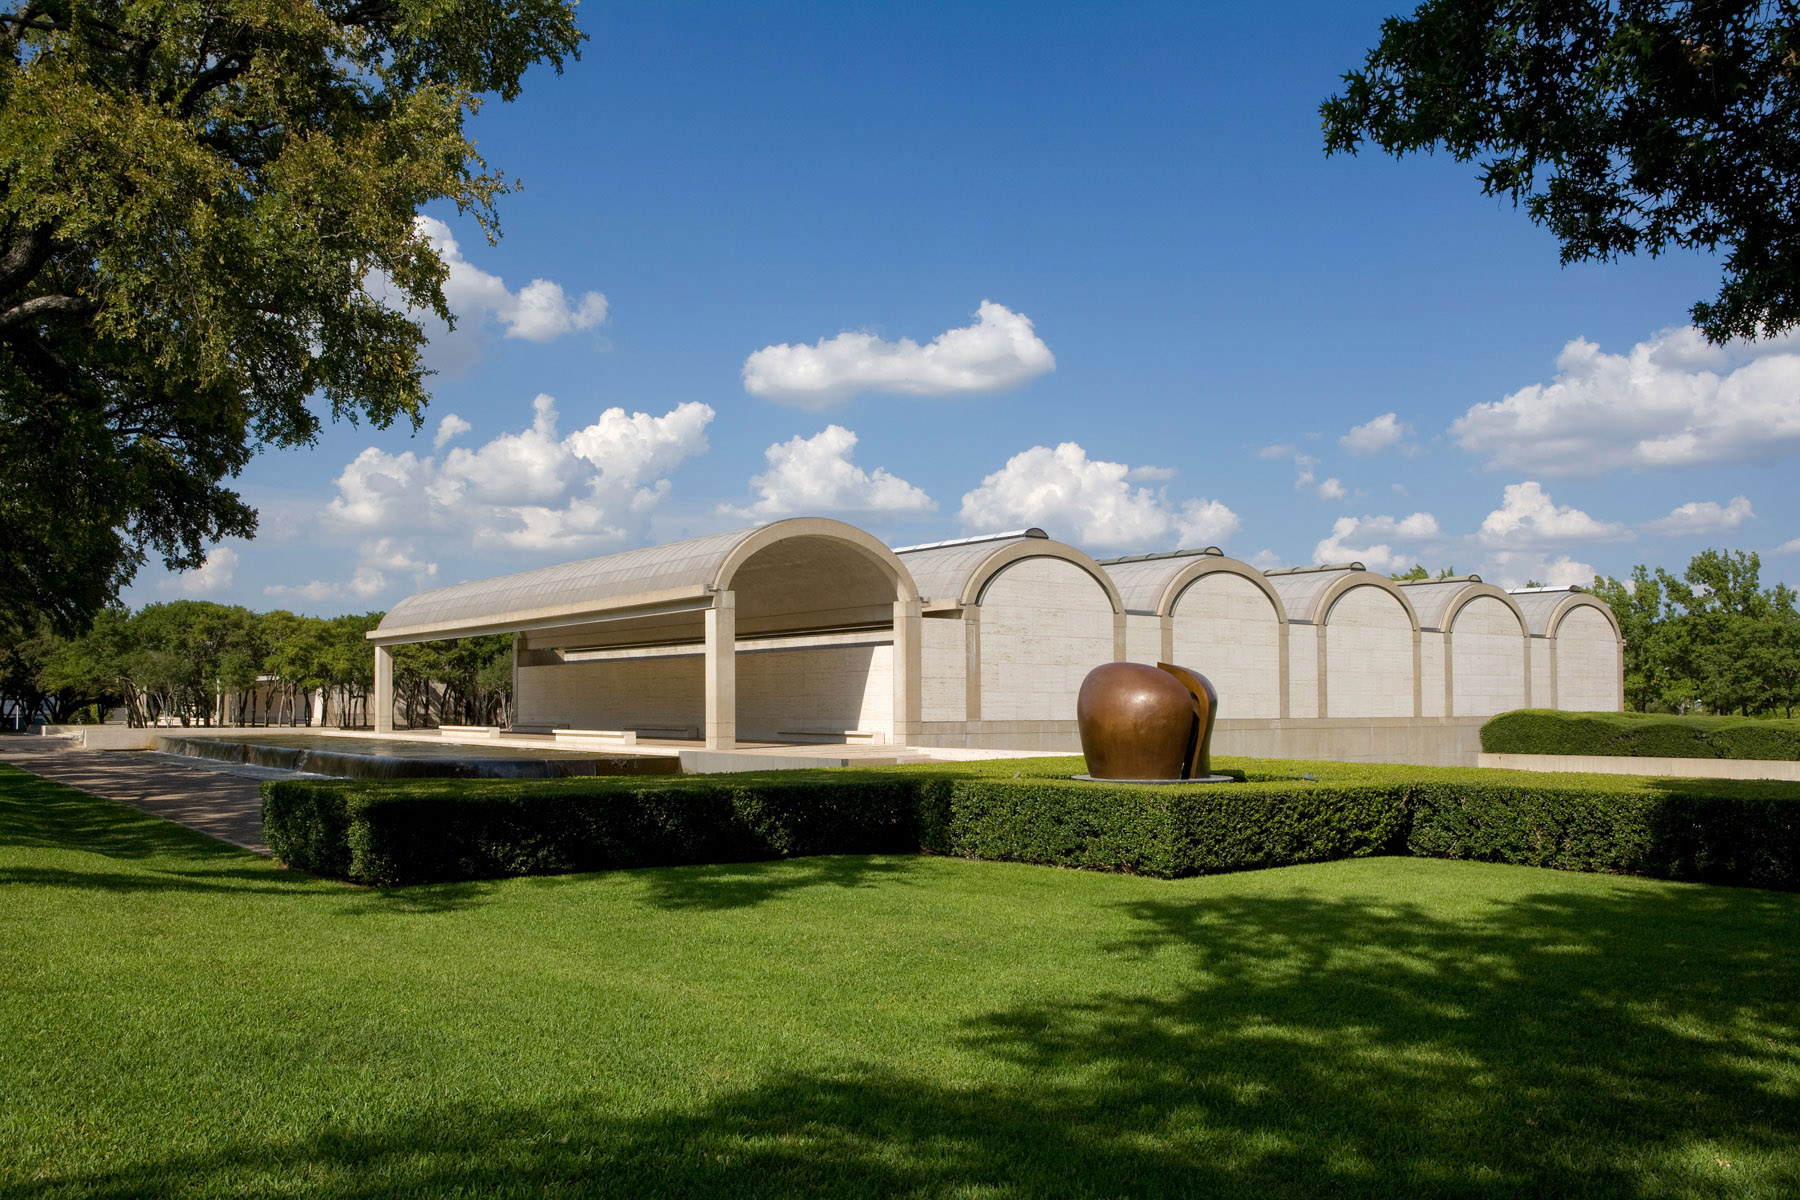 The Kimbell Art Museum façade with a sculpture in the foreground.